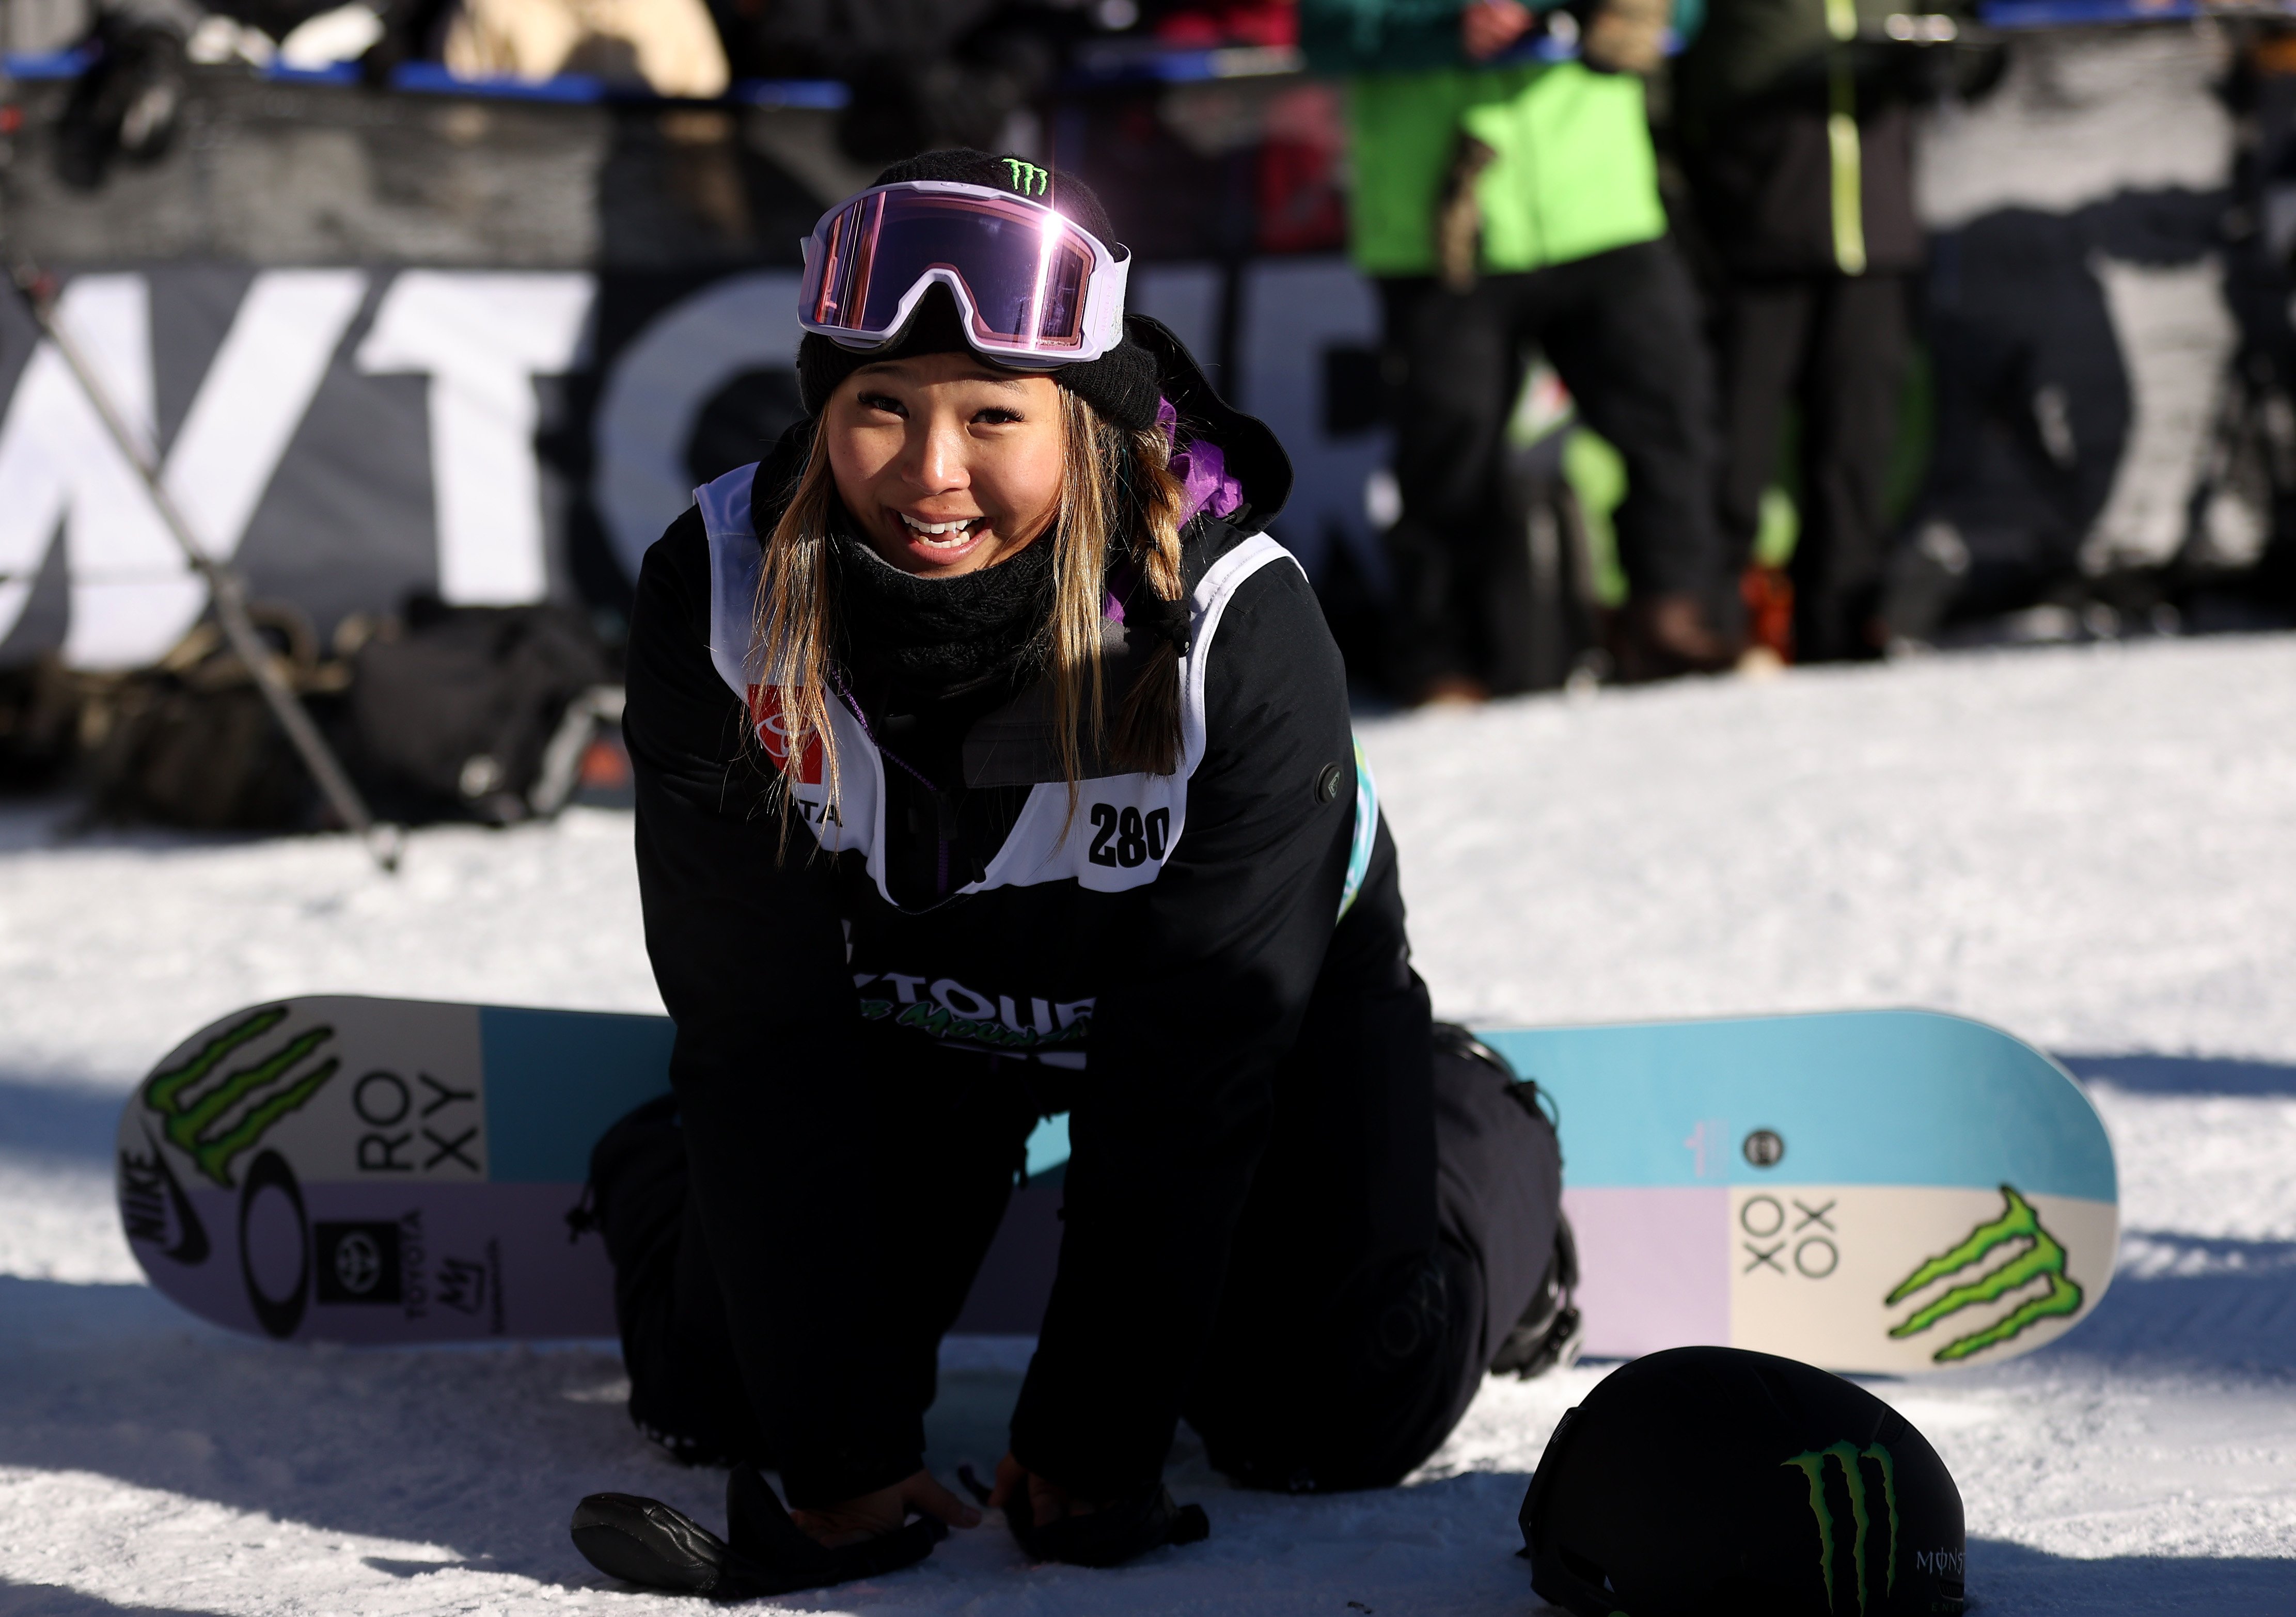 Chloe Kim smiles after her final run of the women's snowboard superpipe at the Dew Tour